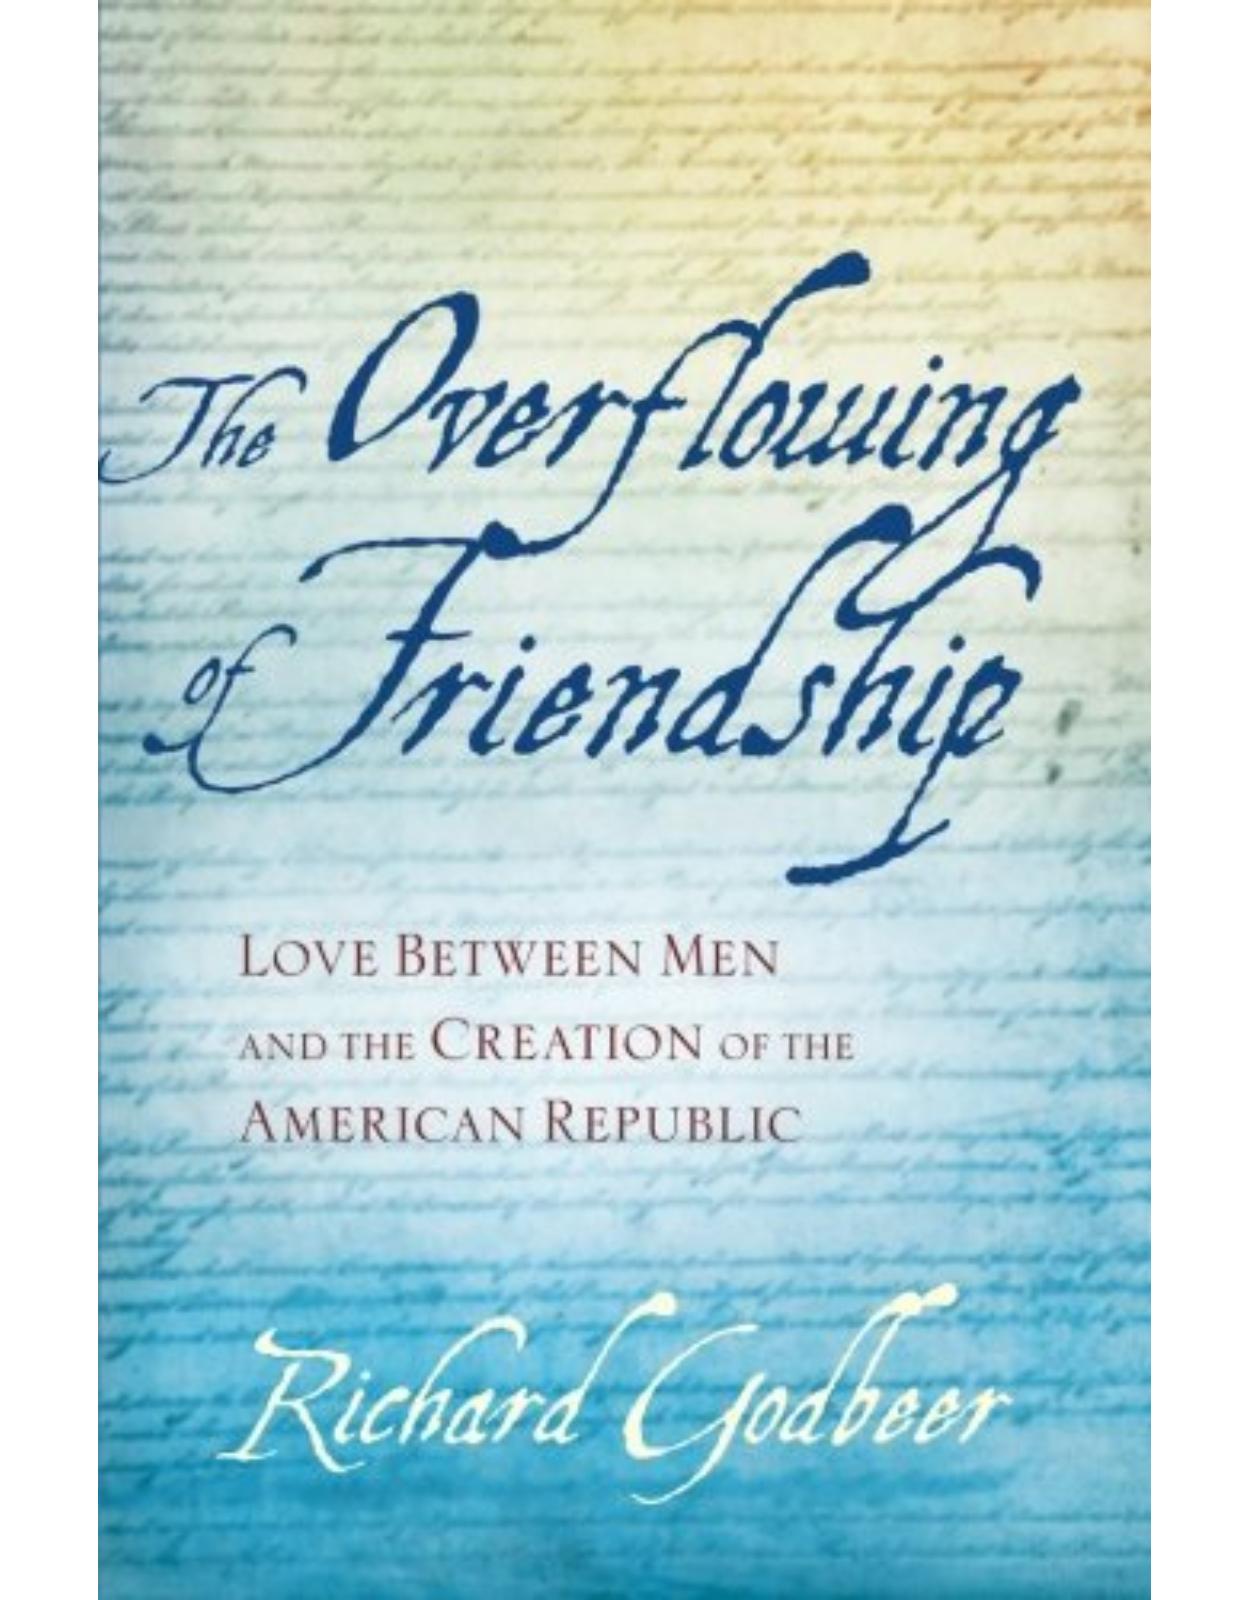 Overflowing of Friendship, Love between Men and the Creation of the American Republic